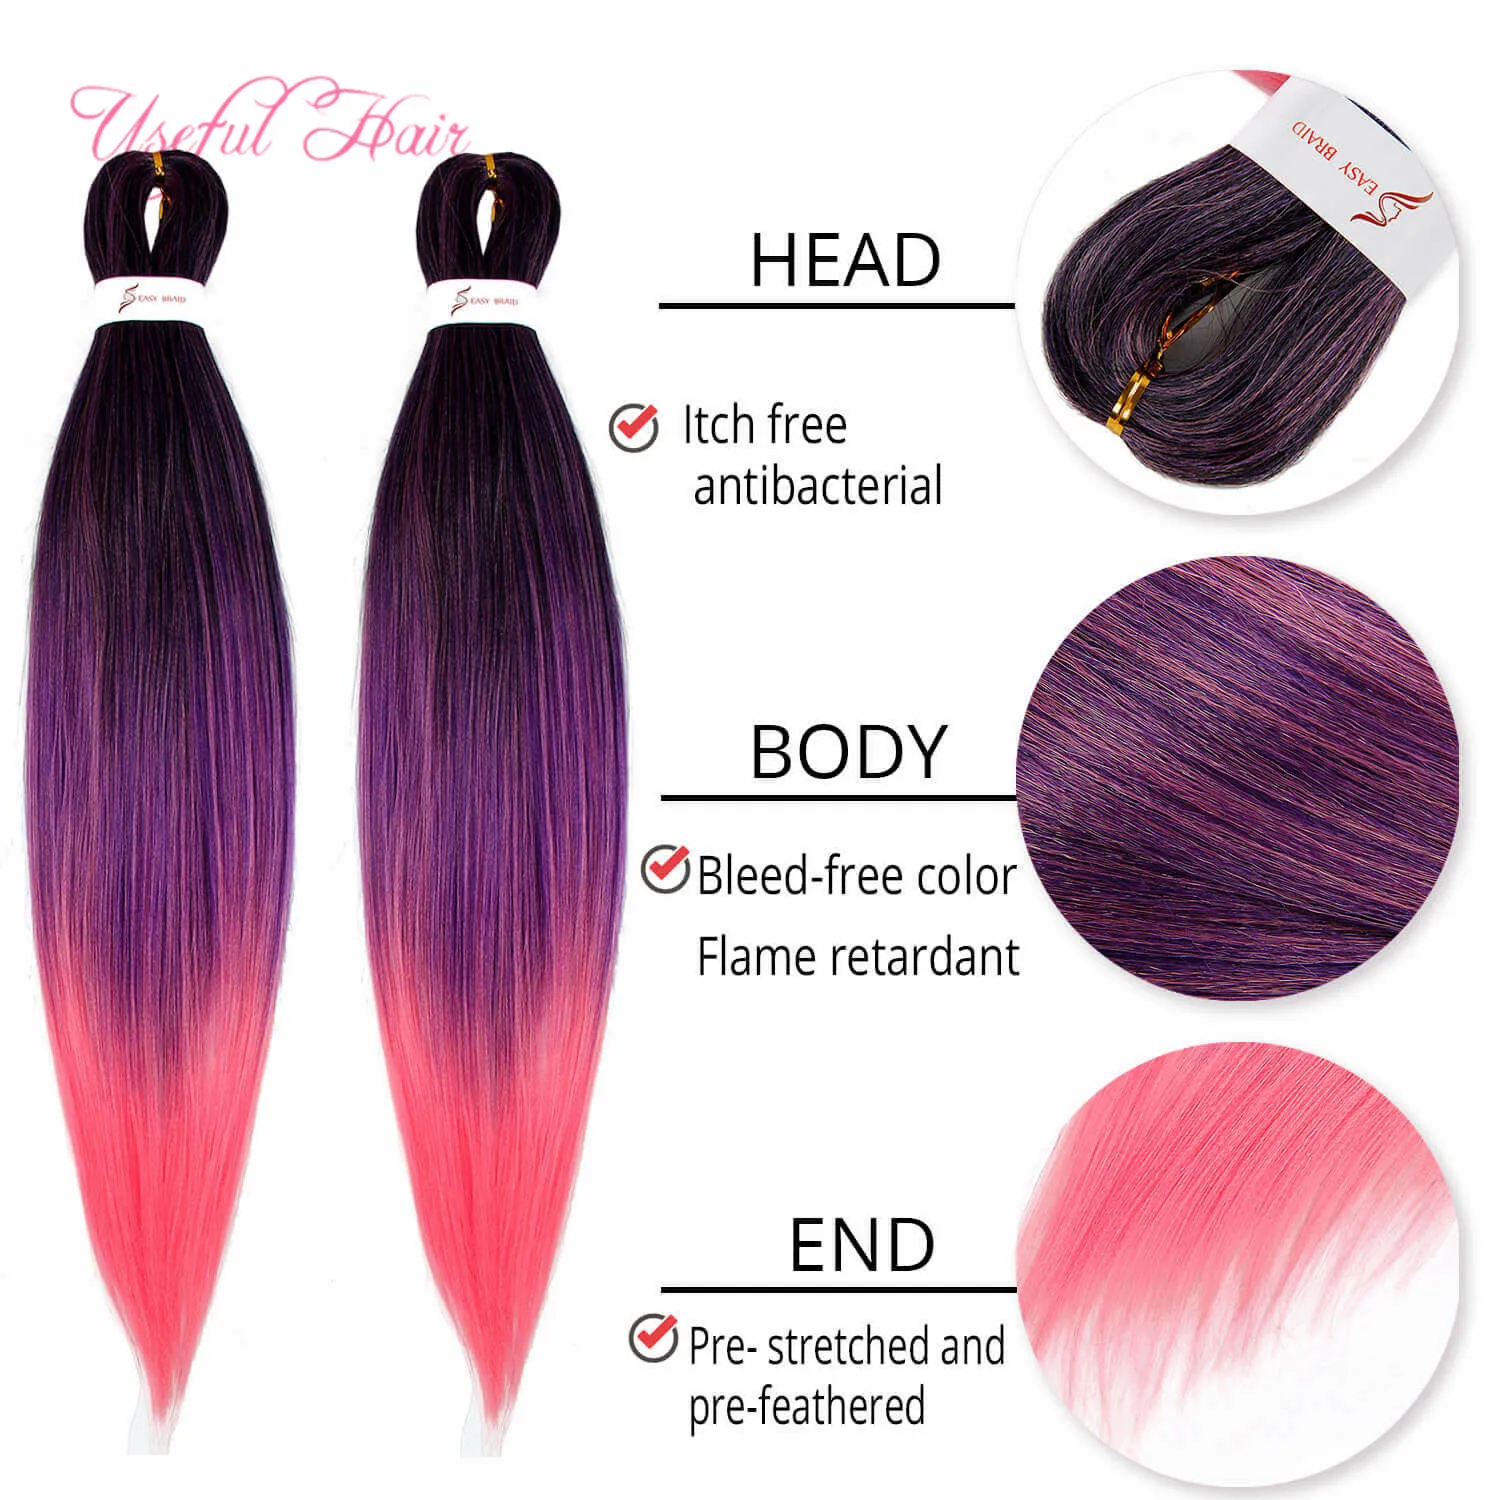 Easy Braid synthetic Hair For Braid Pre-Stretched Ombre Crochet Braid Hair fashion new Extensions 24inch For Black Women